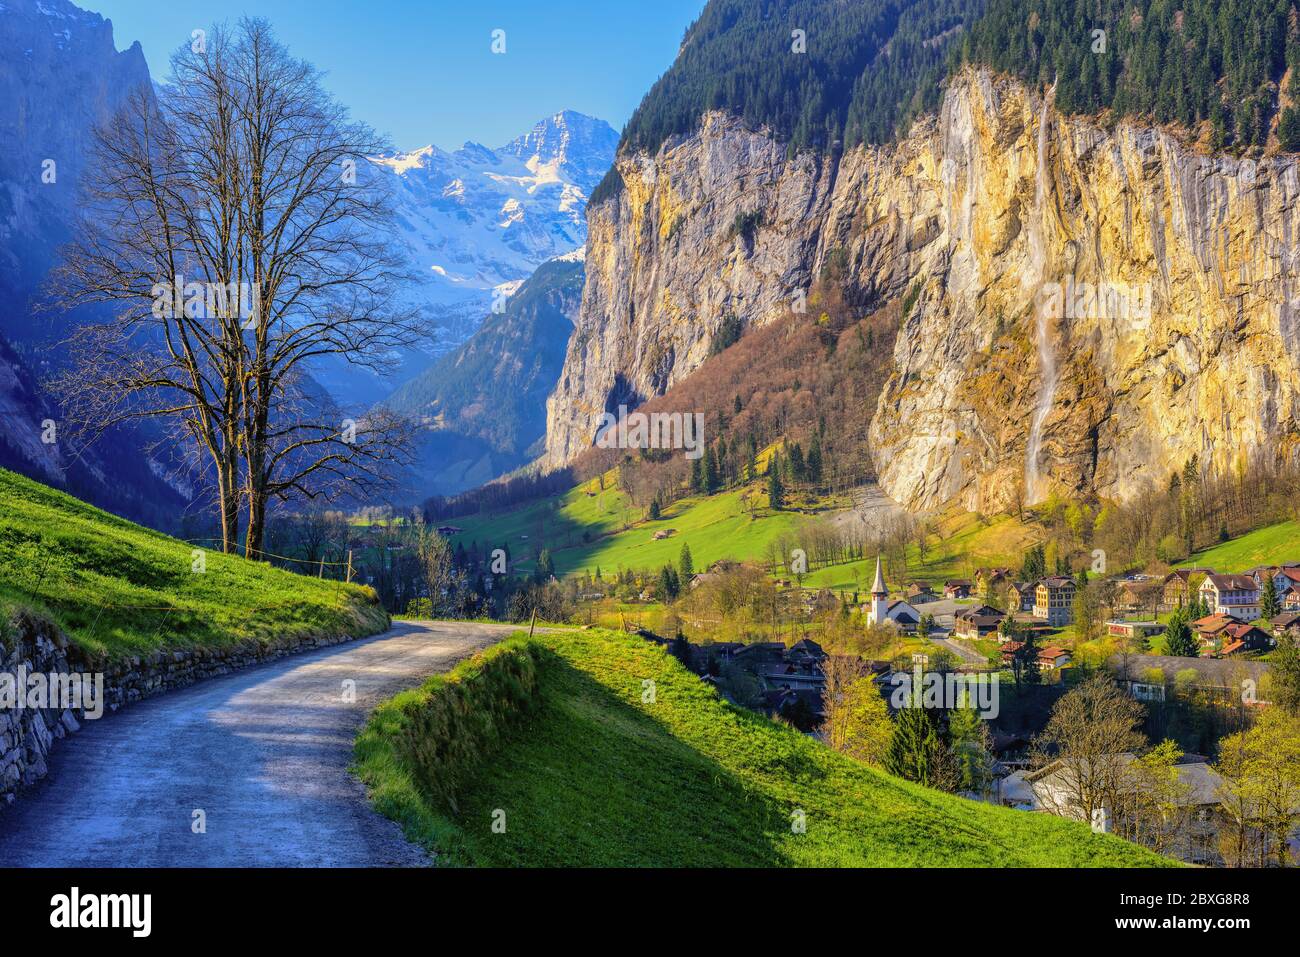 Lauterbrunnen village in a valley in swiss Alps mountains, Bernese Highlands, Jungfrau region, is one of the most popular tourist destinations in Swit Stock Photo